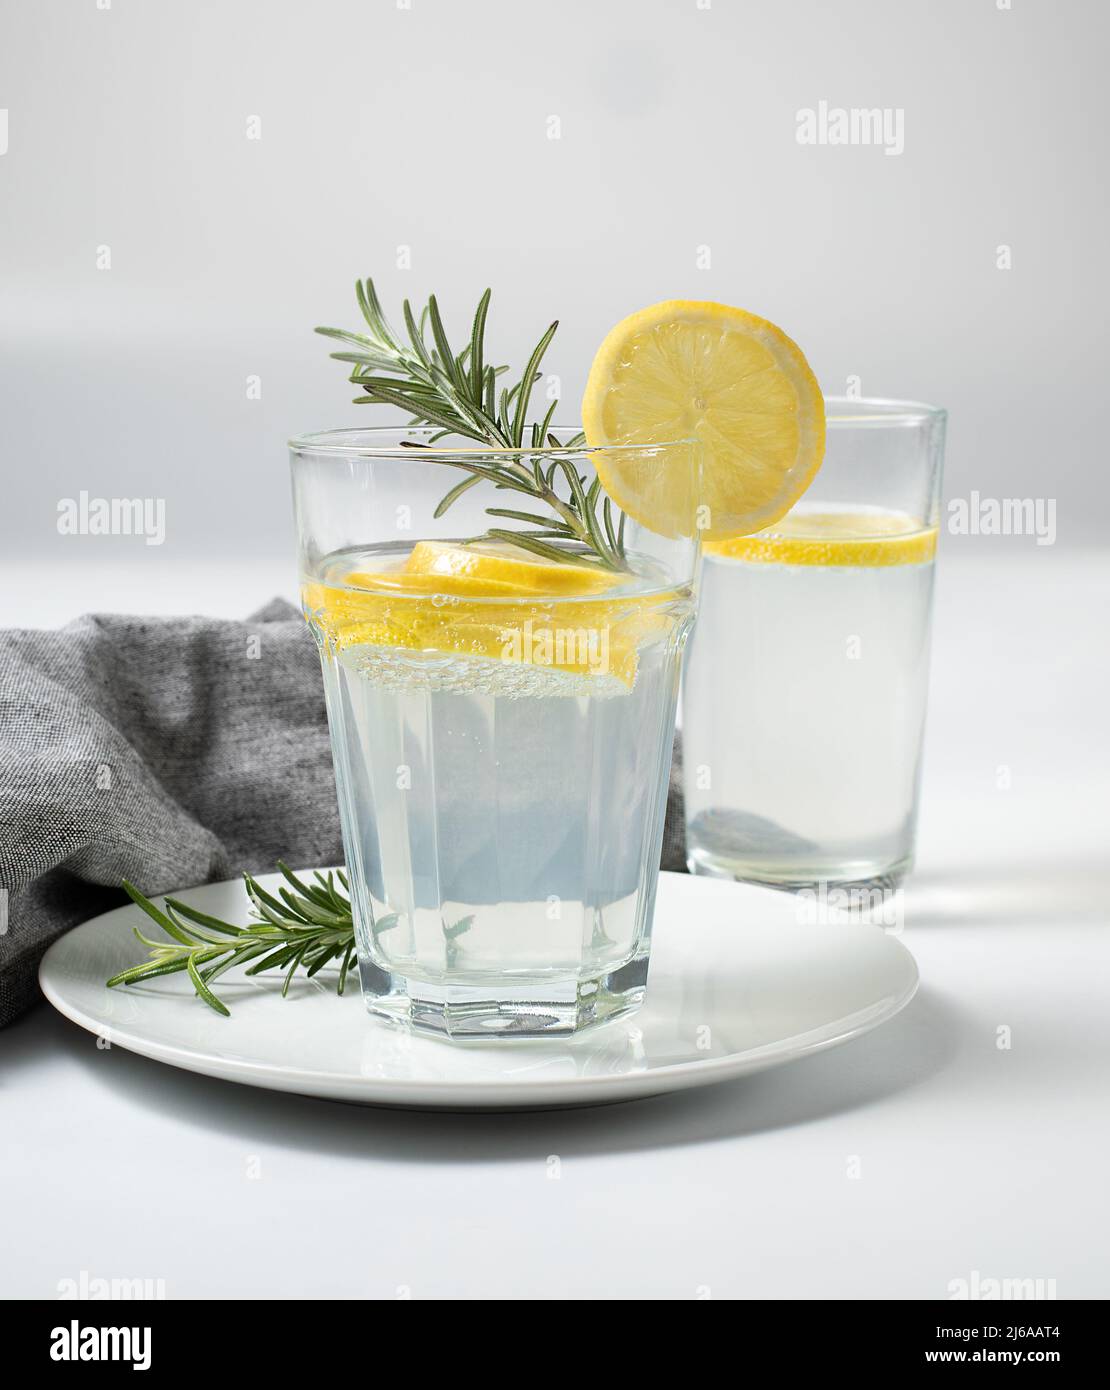 Two glasses with fresh lemon water or homemade lemonade with rosemary on white background, textile, stock photo, concept Stock Photo